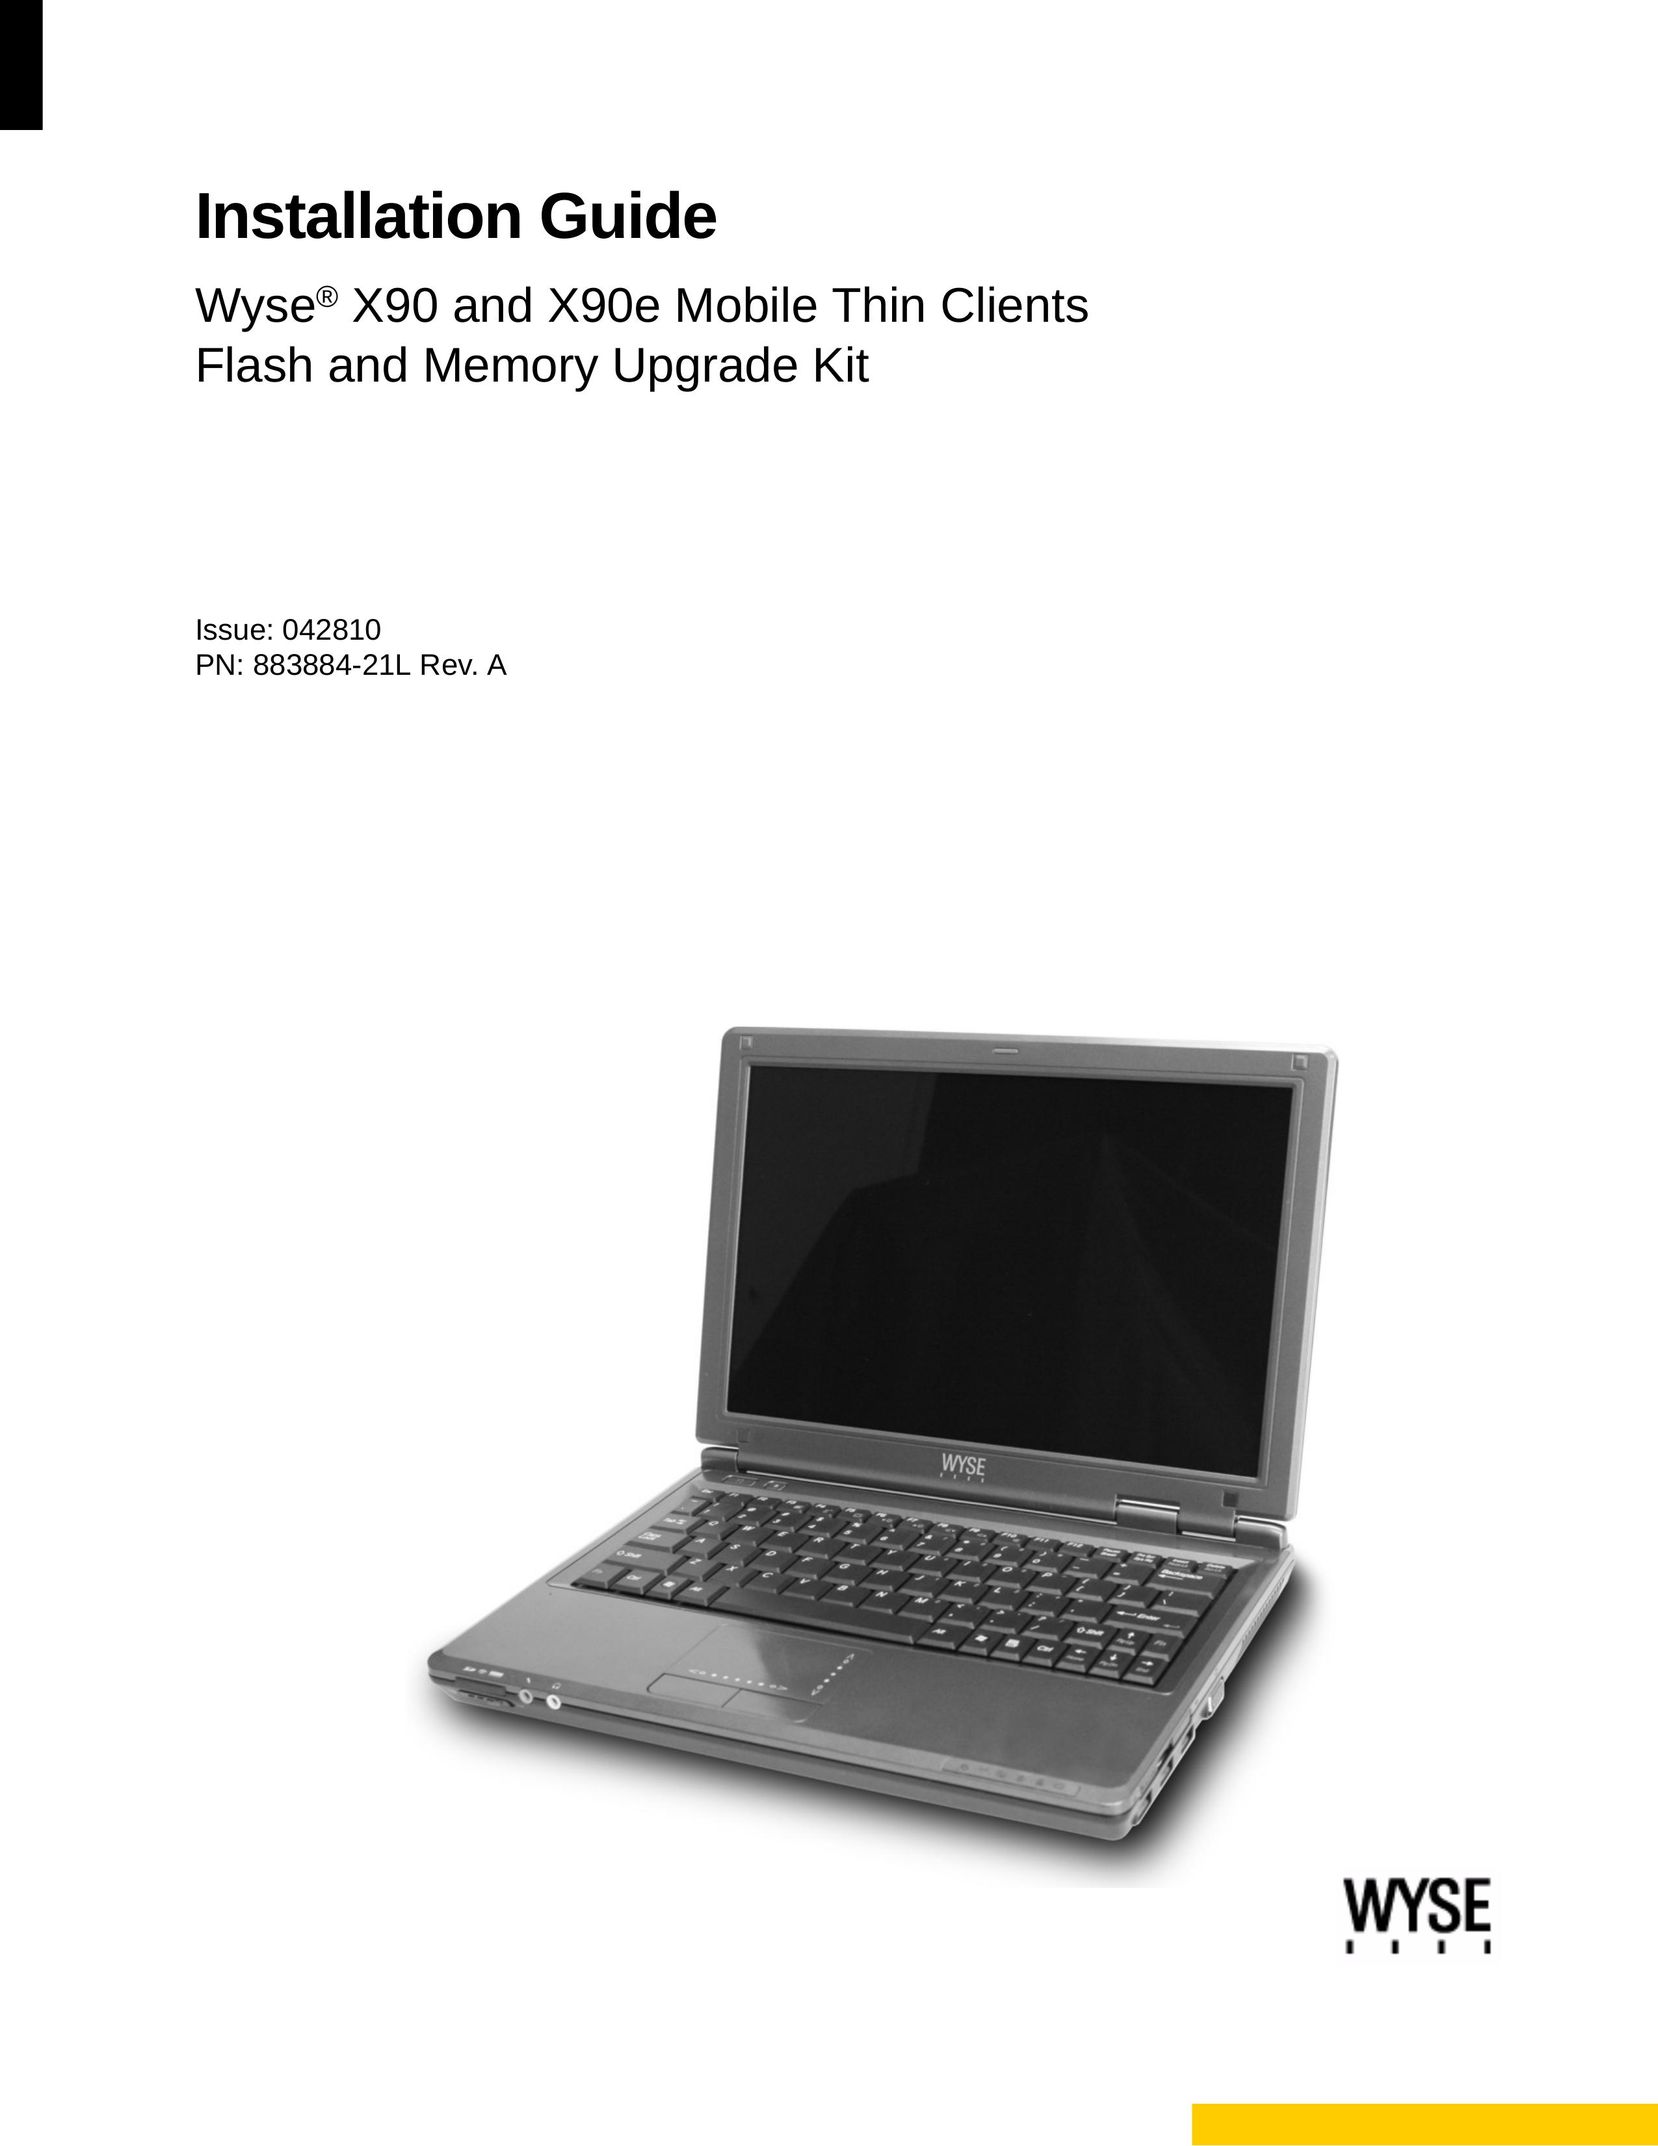 Wyse Technology X90 Computer Drive User Manual